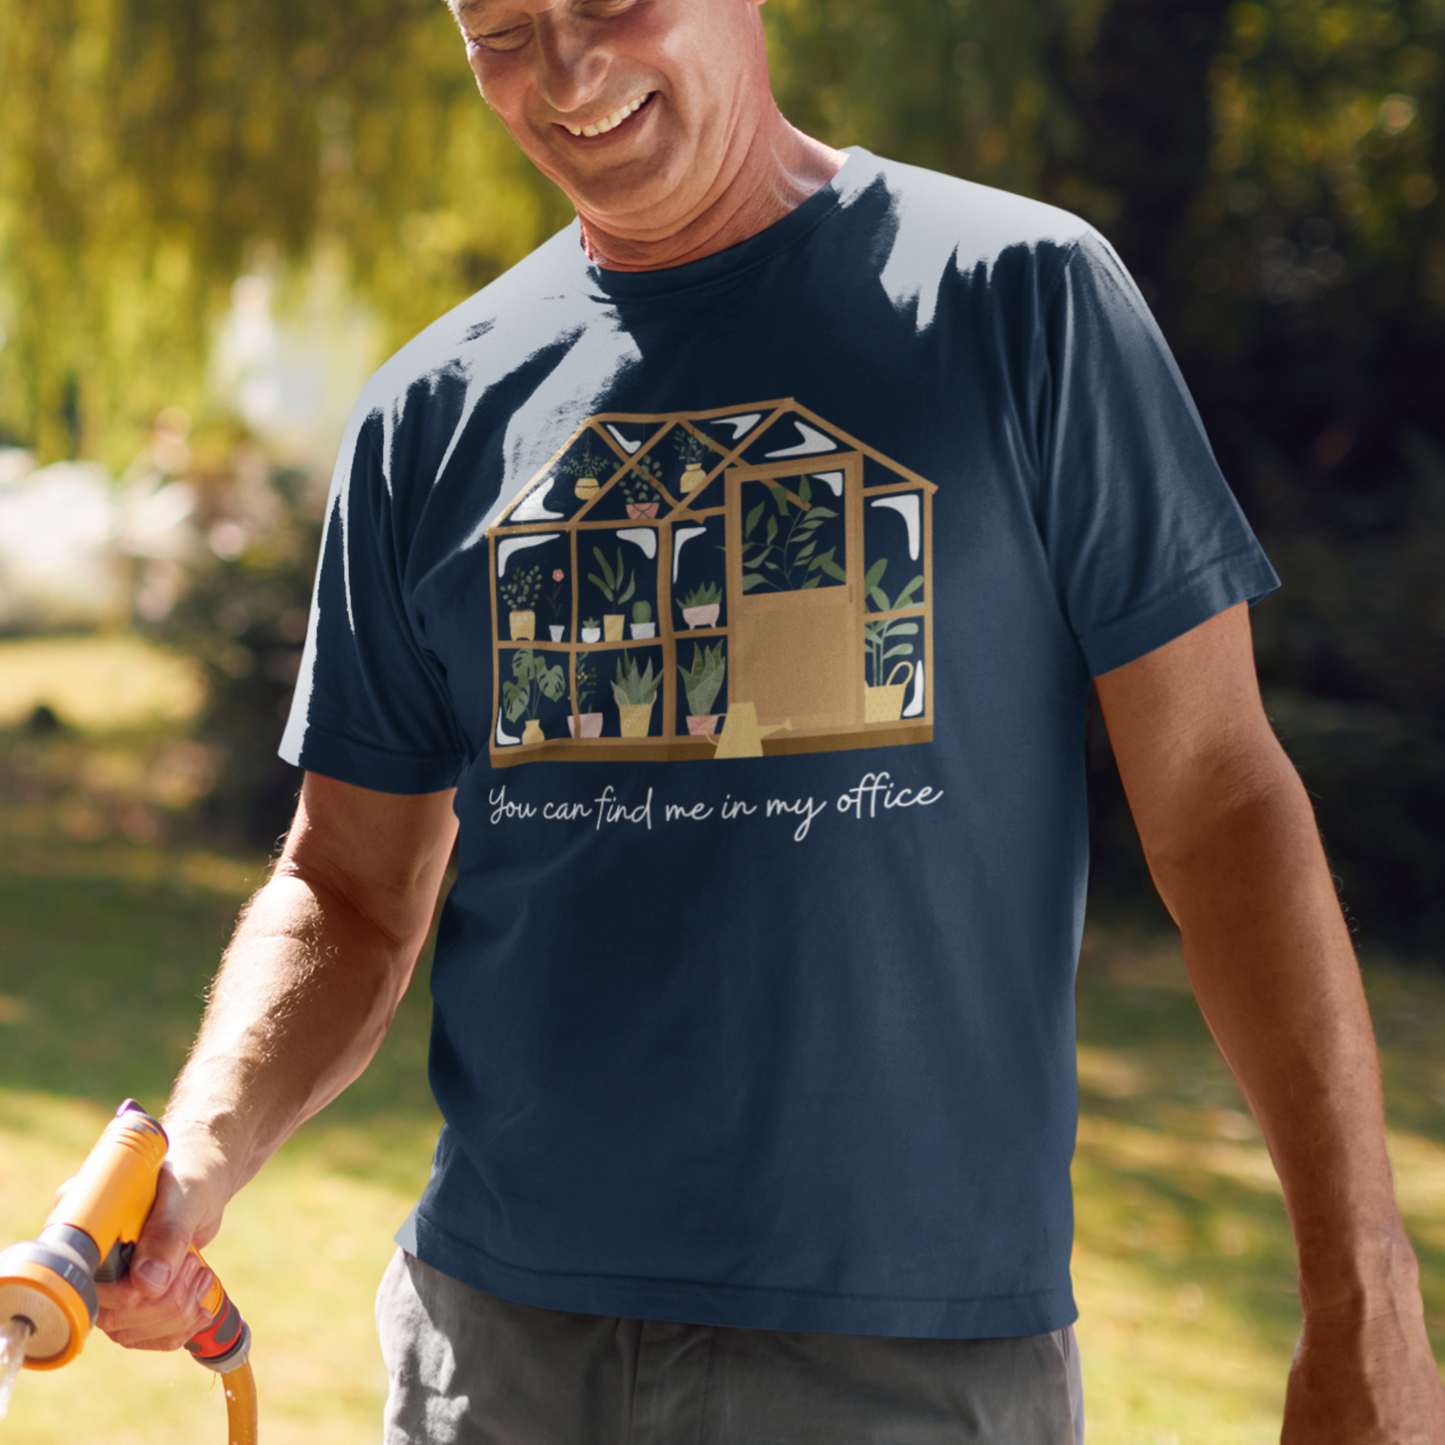 Men's "You Can Find Me in My Office" Greenhouse/Gardening T-shirt